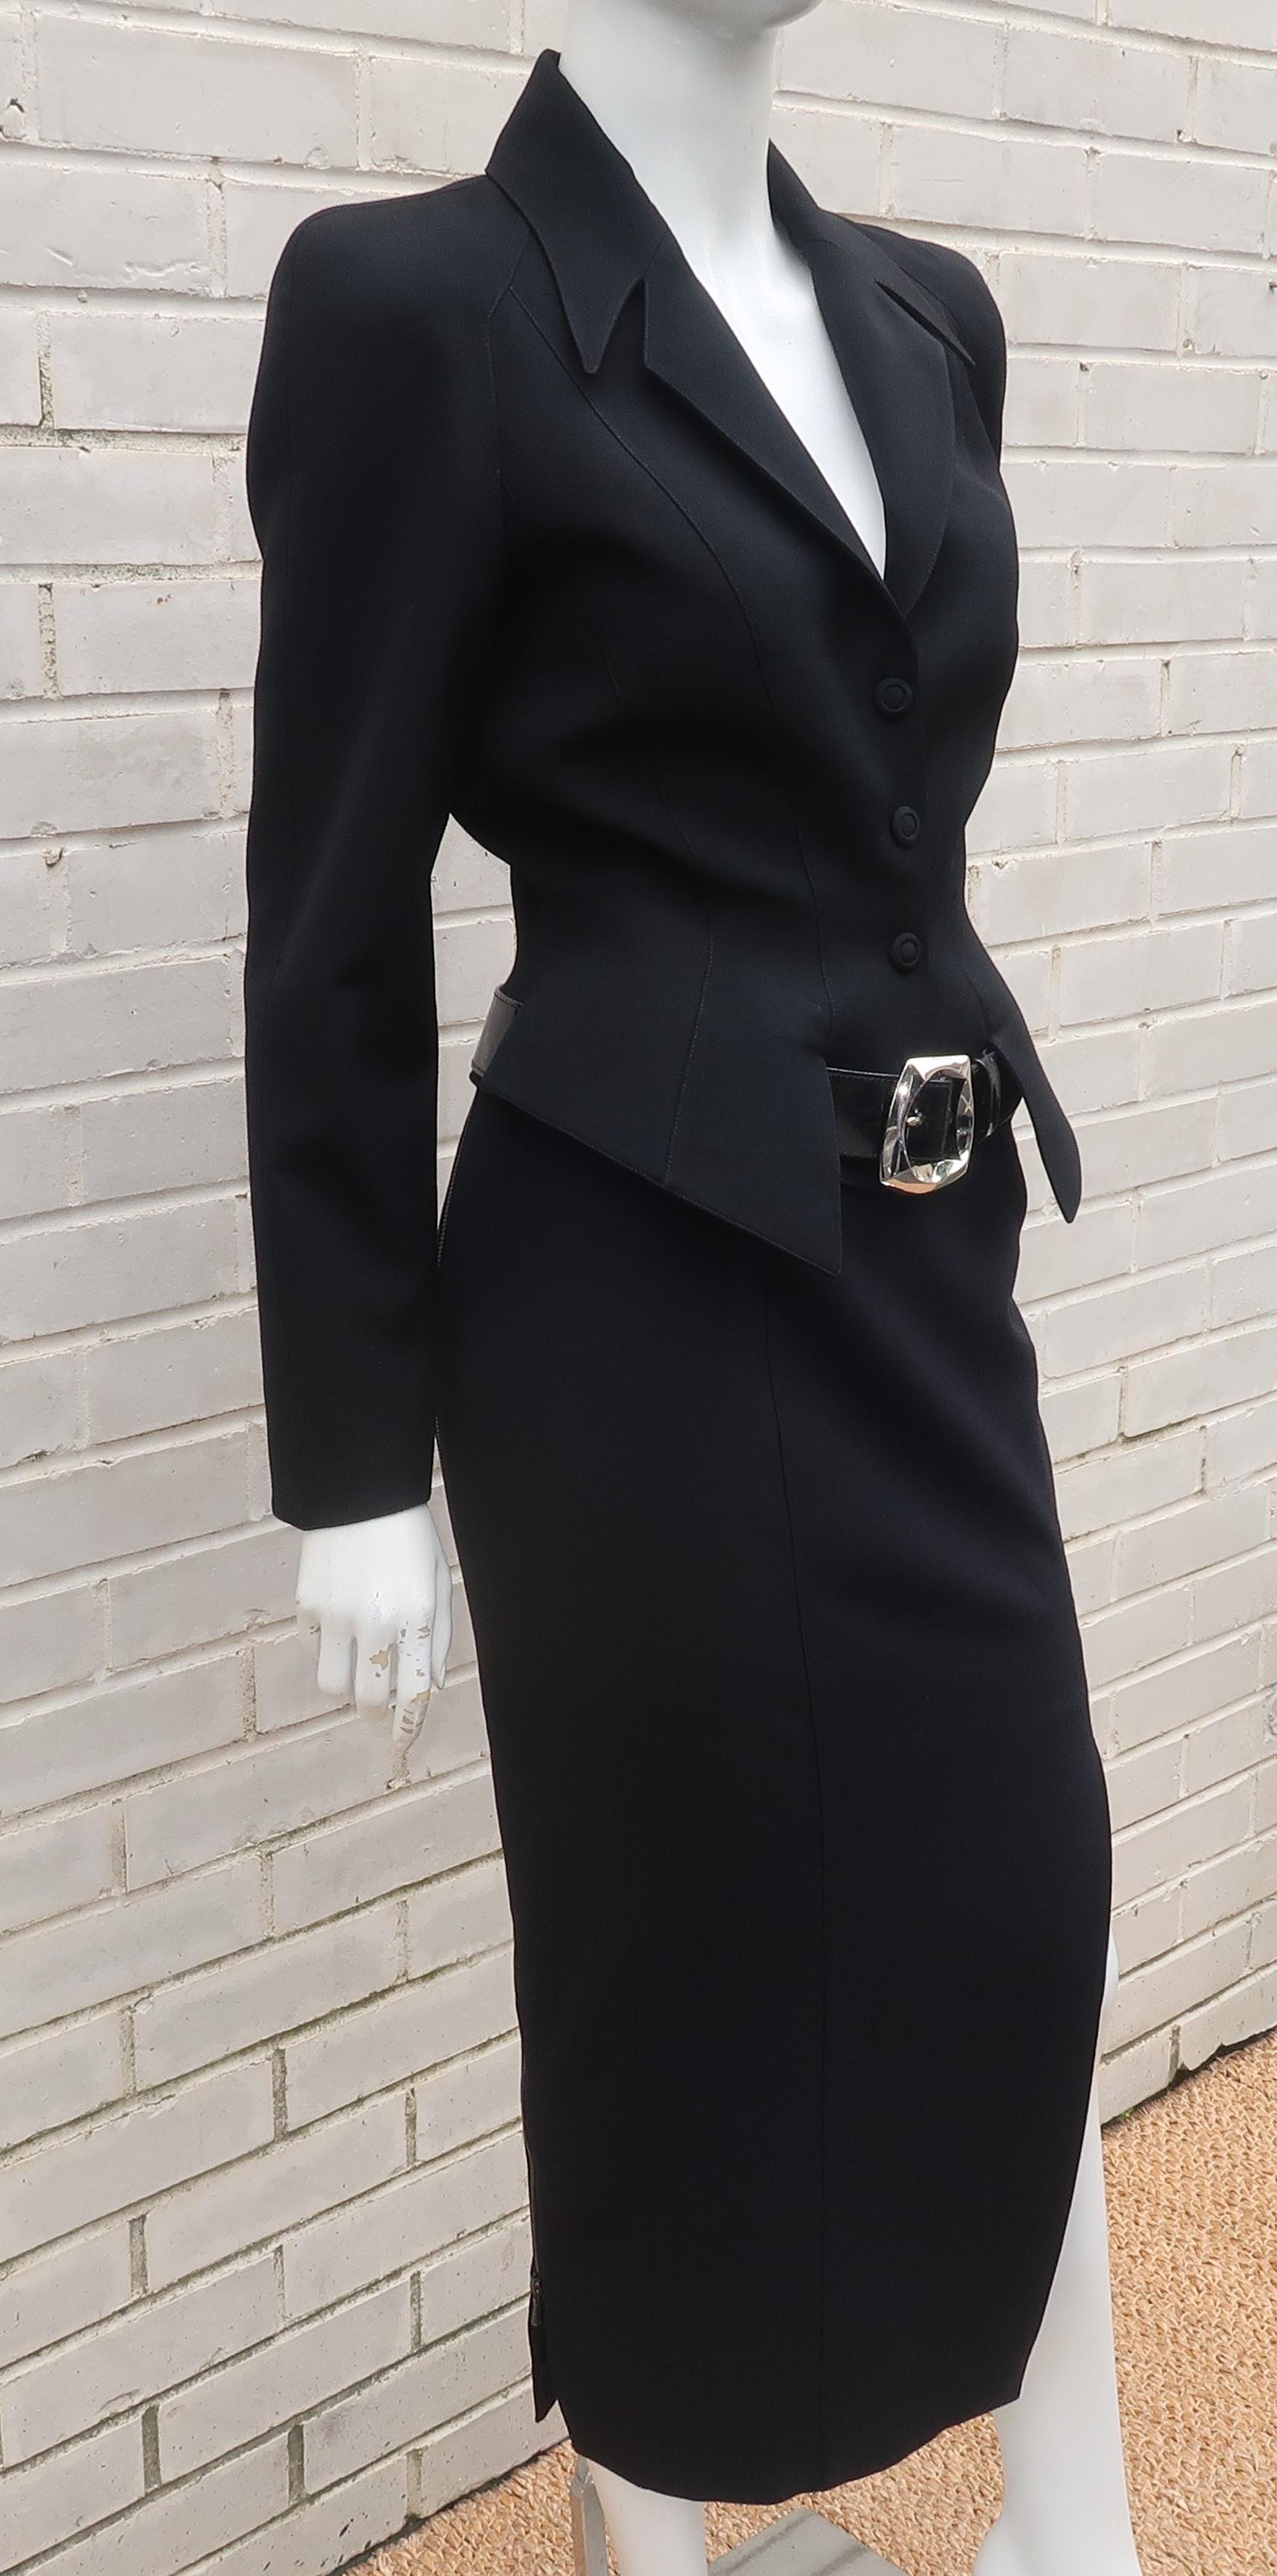 Women's Thierry Mugler Black Suit With Belt, 1990's